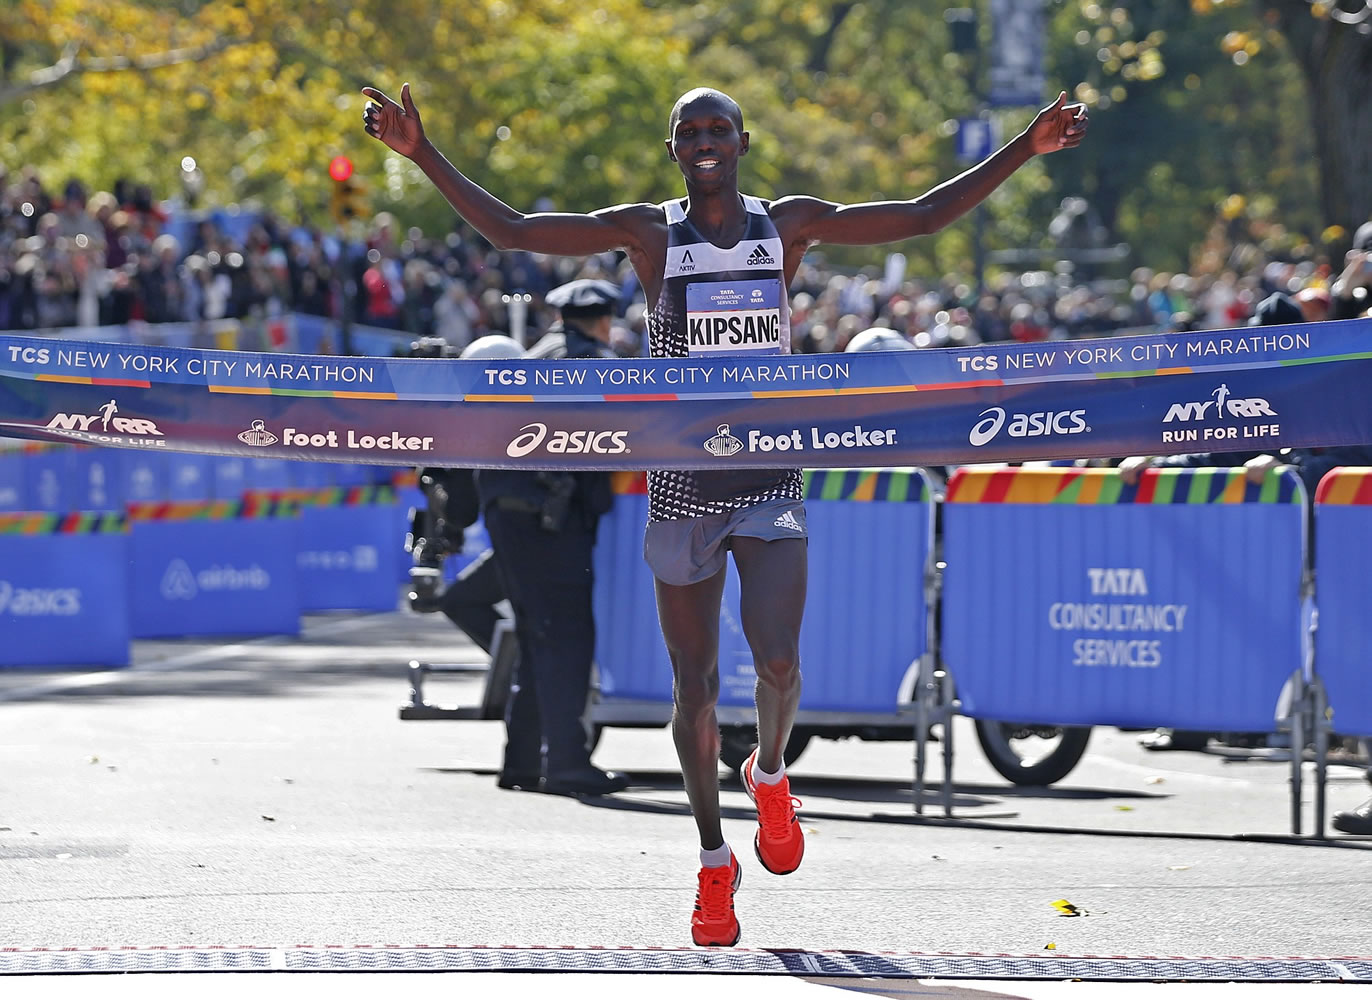 Wilson Kipsang of Kenya celebrates as he hits the tape to win the men's division of the the 44th annual New York City Marathon in New York, Sunday, Nov. 2, 2014. Kipsang won in an unofficial time of 2 hours, 10 minutes, 59 seconds.